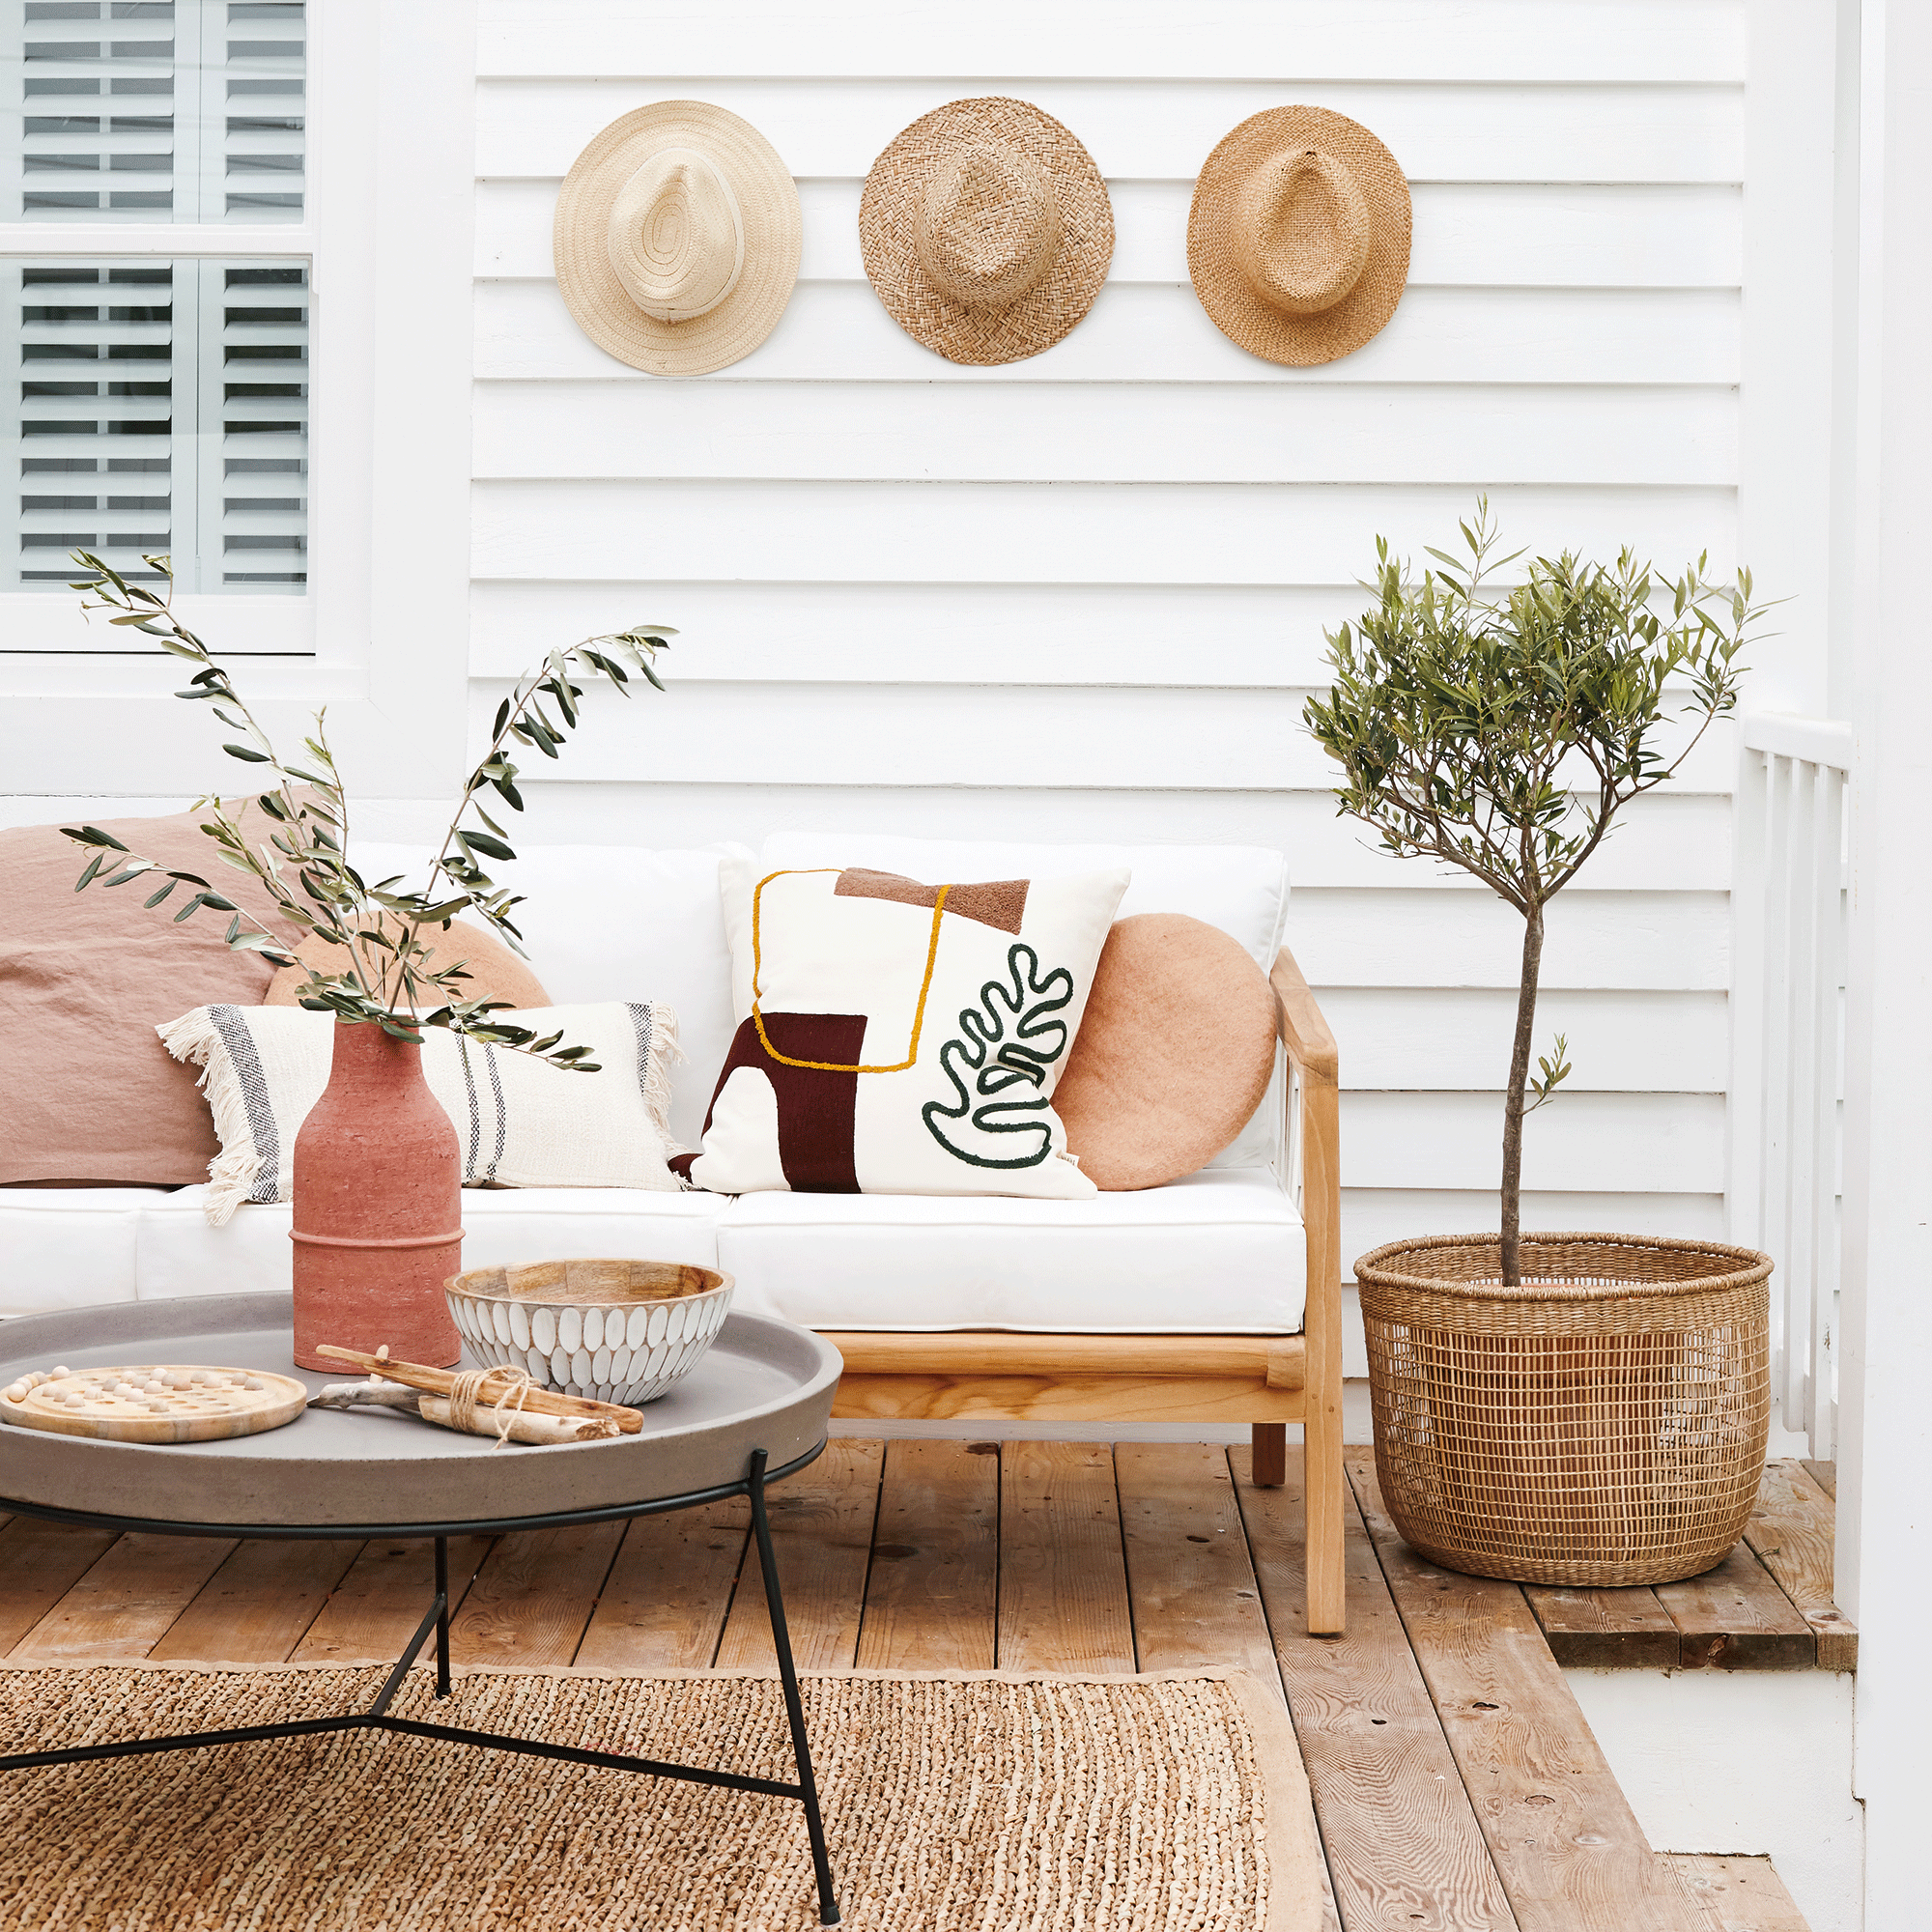 White outdoors with straw hats